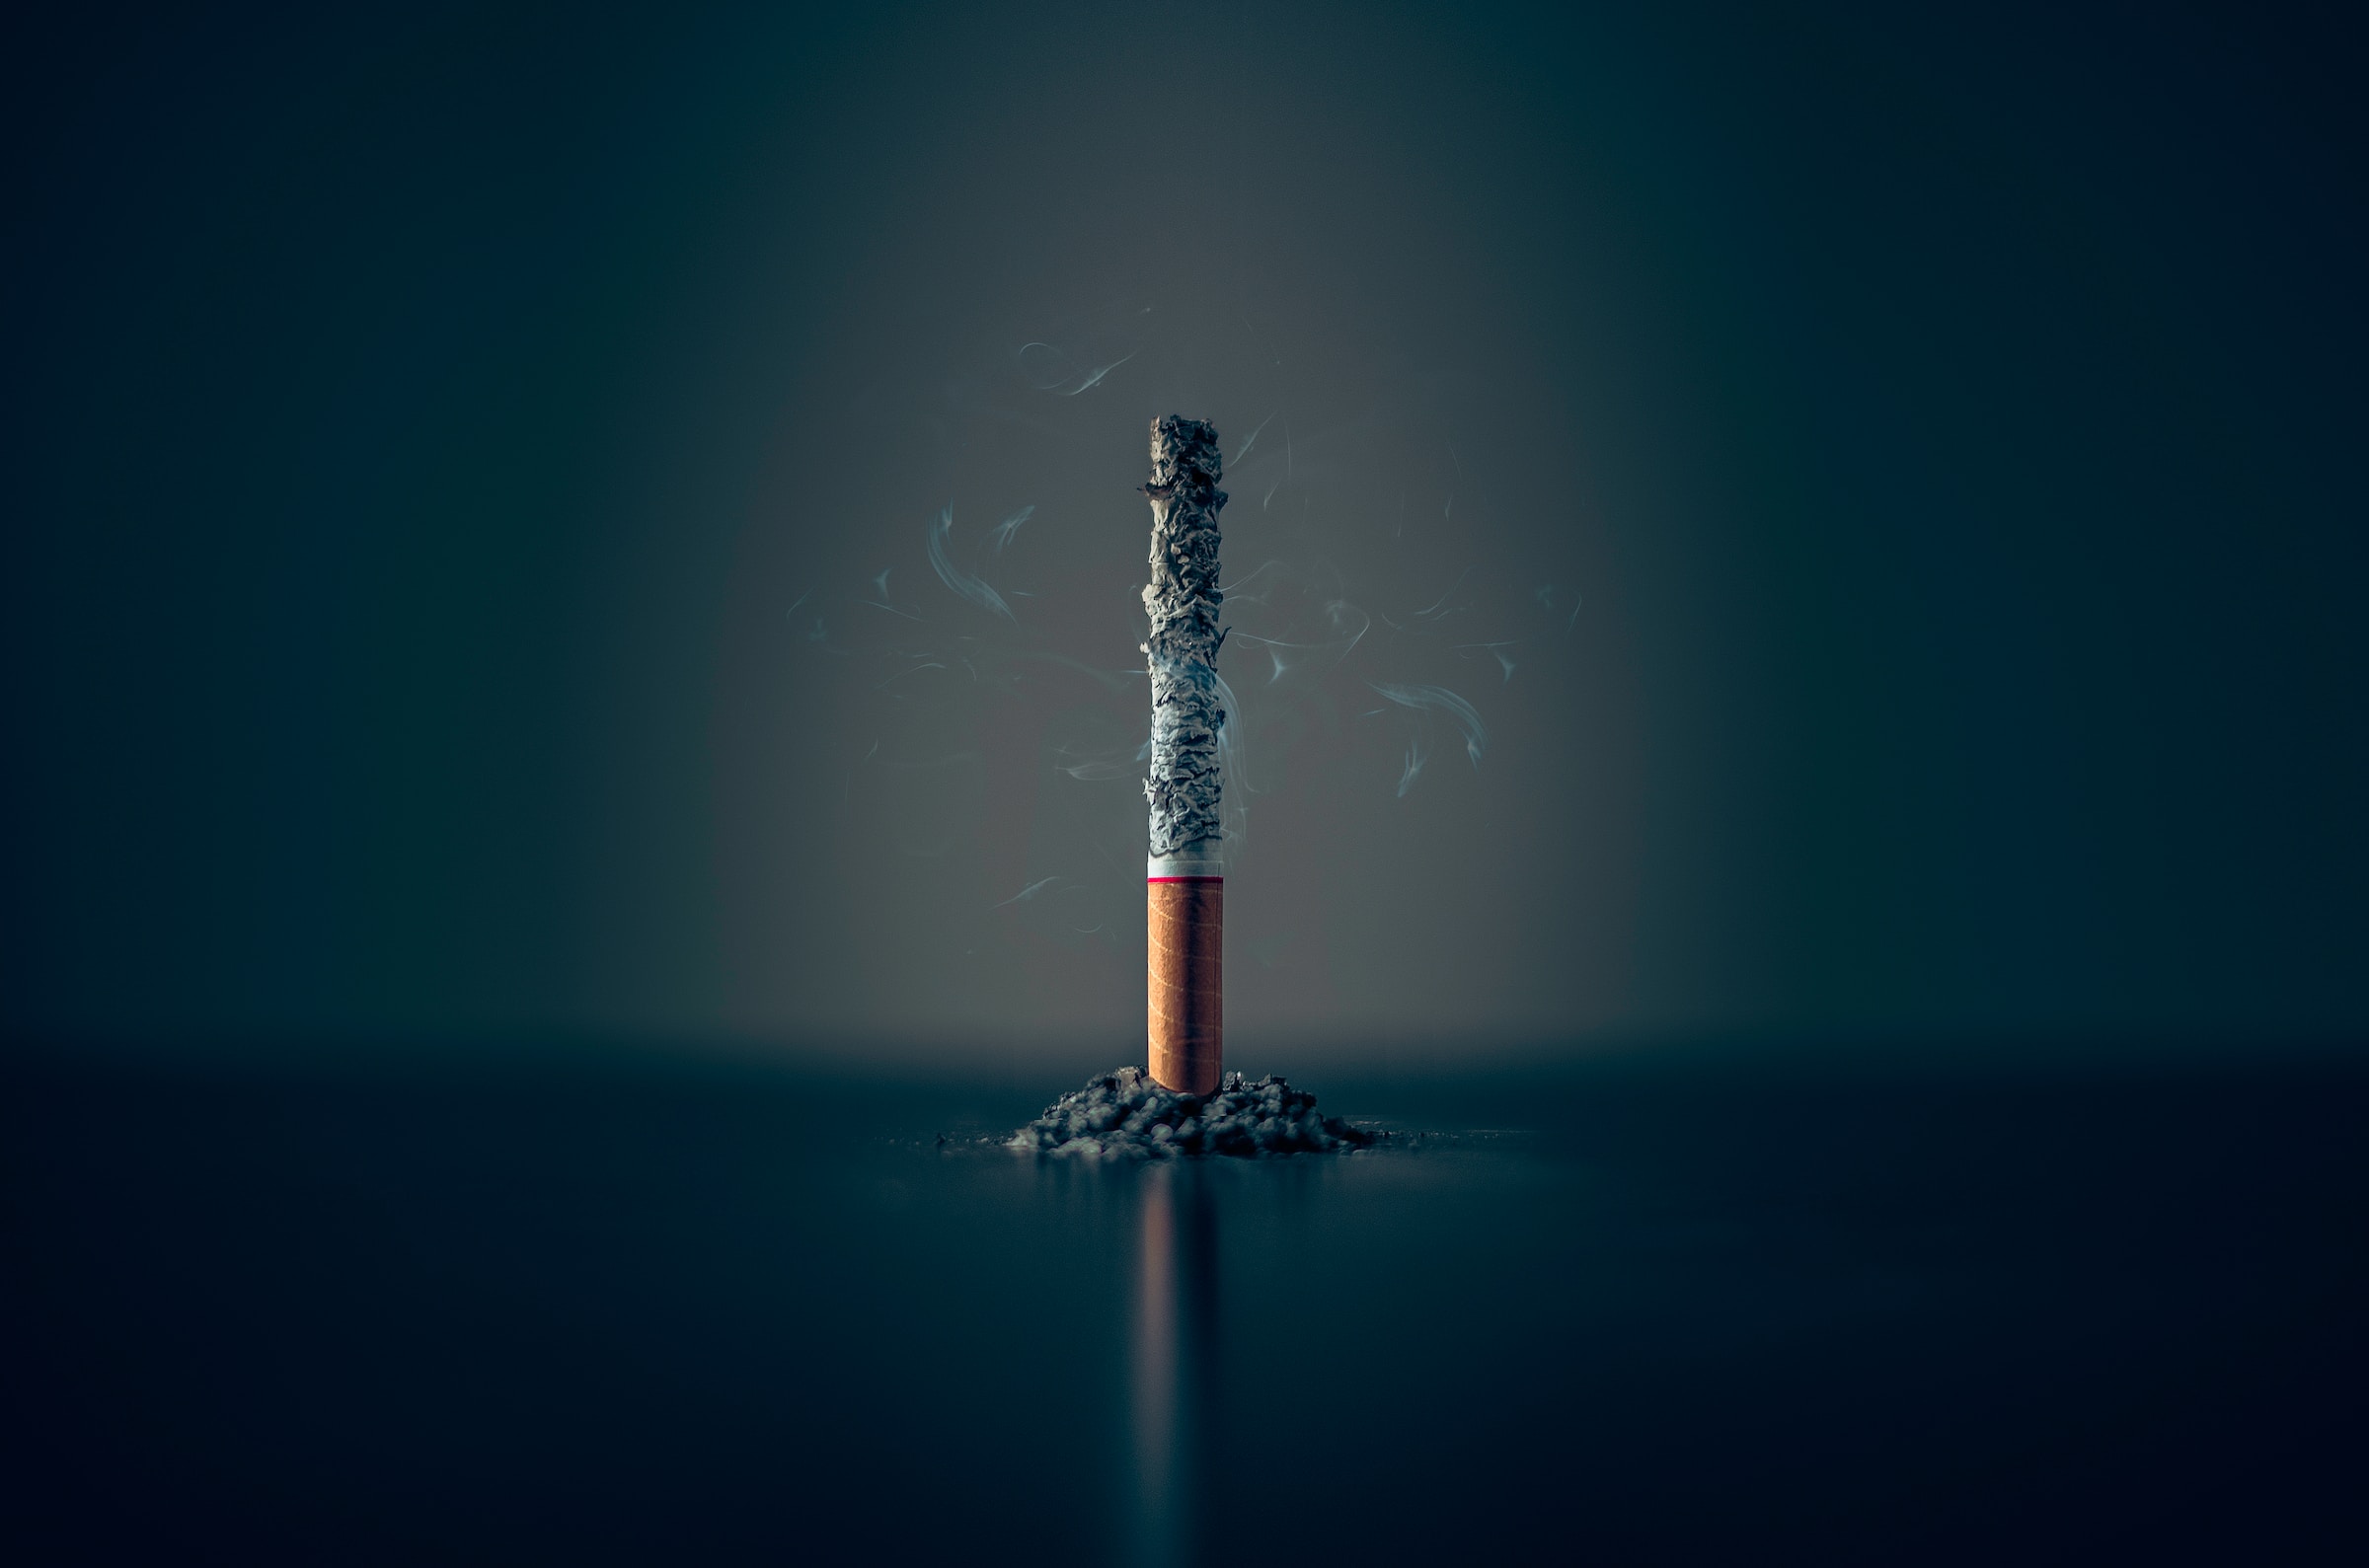 Tobacco harm reduction can hasten an end to smoking-related death and disease. Copyright-free photo by Mathew MacQuarrie on Unsplash.